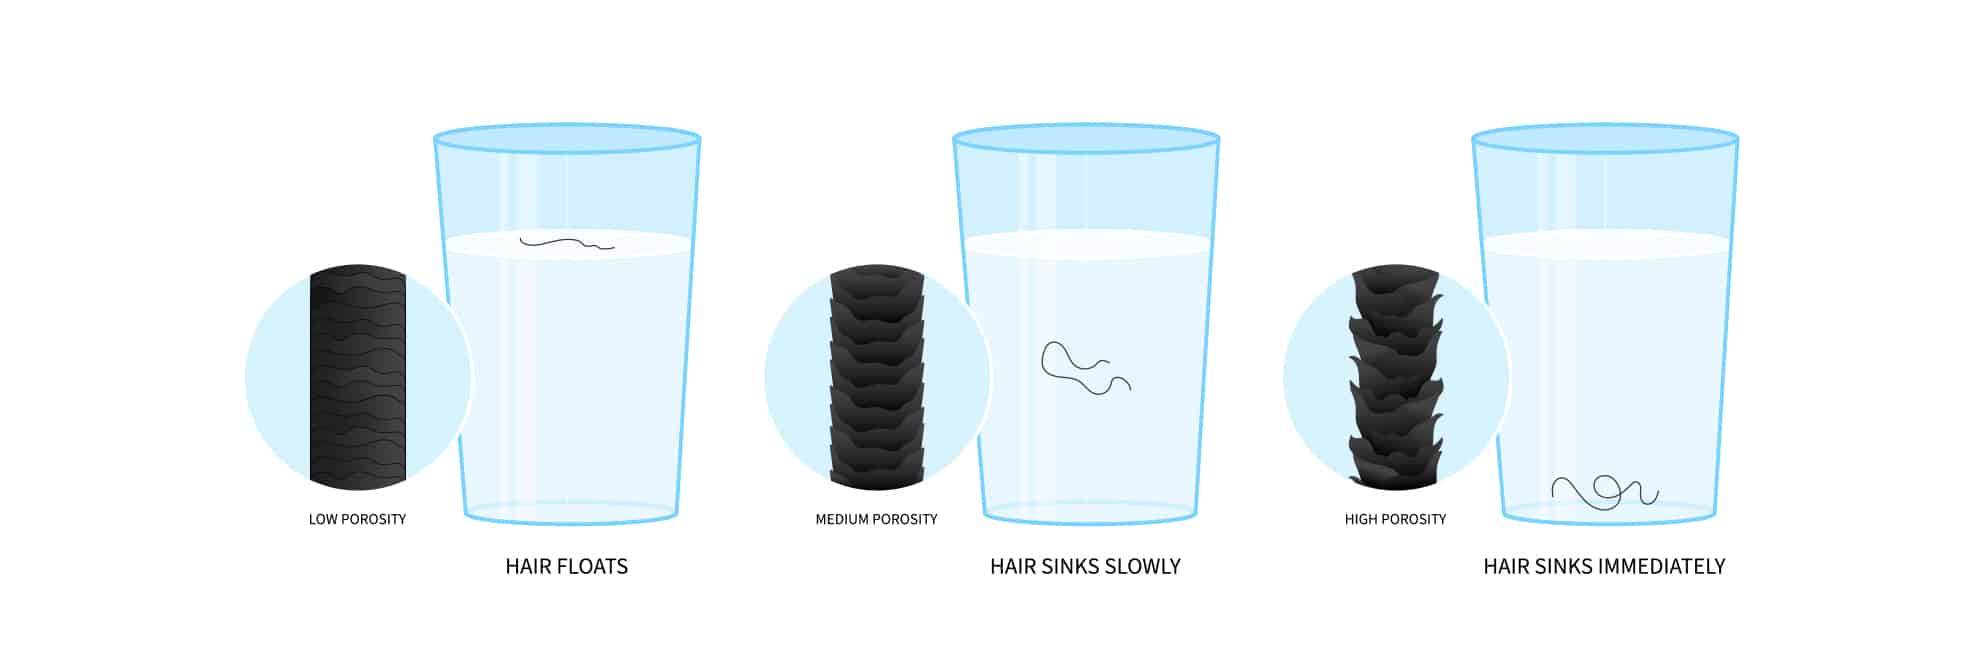 Image showing whether your hair floats in a glass or not, depending on the hair porosity.